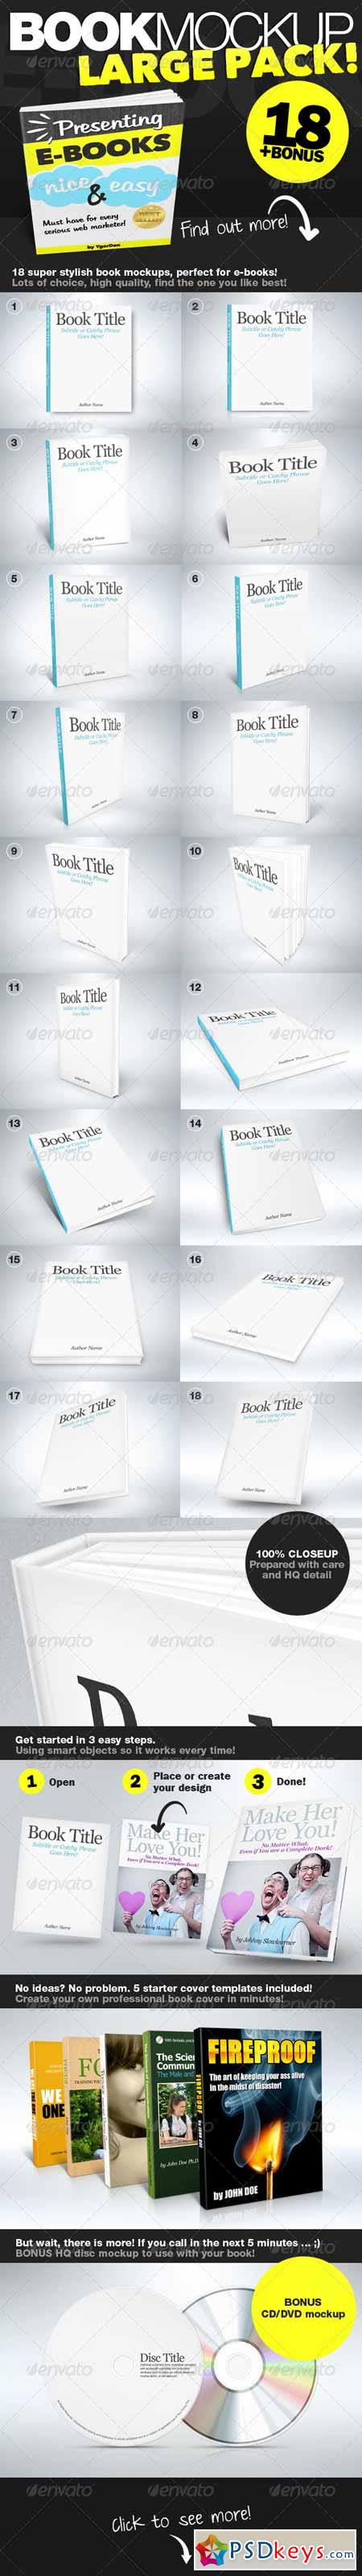 Download Book Page 17 Free Download Photoshop Vector Stock Image Via Torrent Zippyshare From Psdkeys Com PSD Mockup Templates